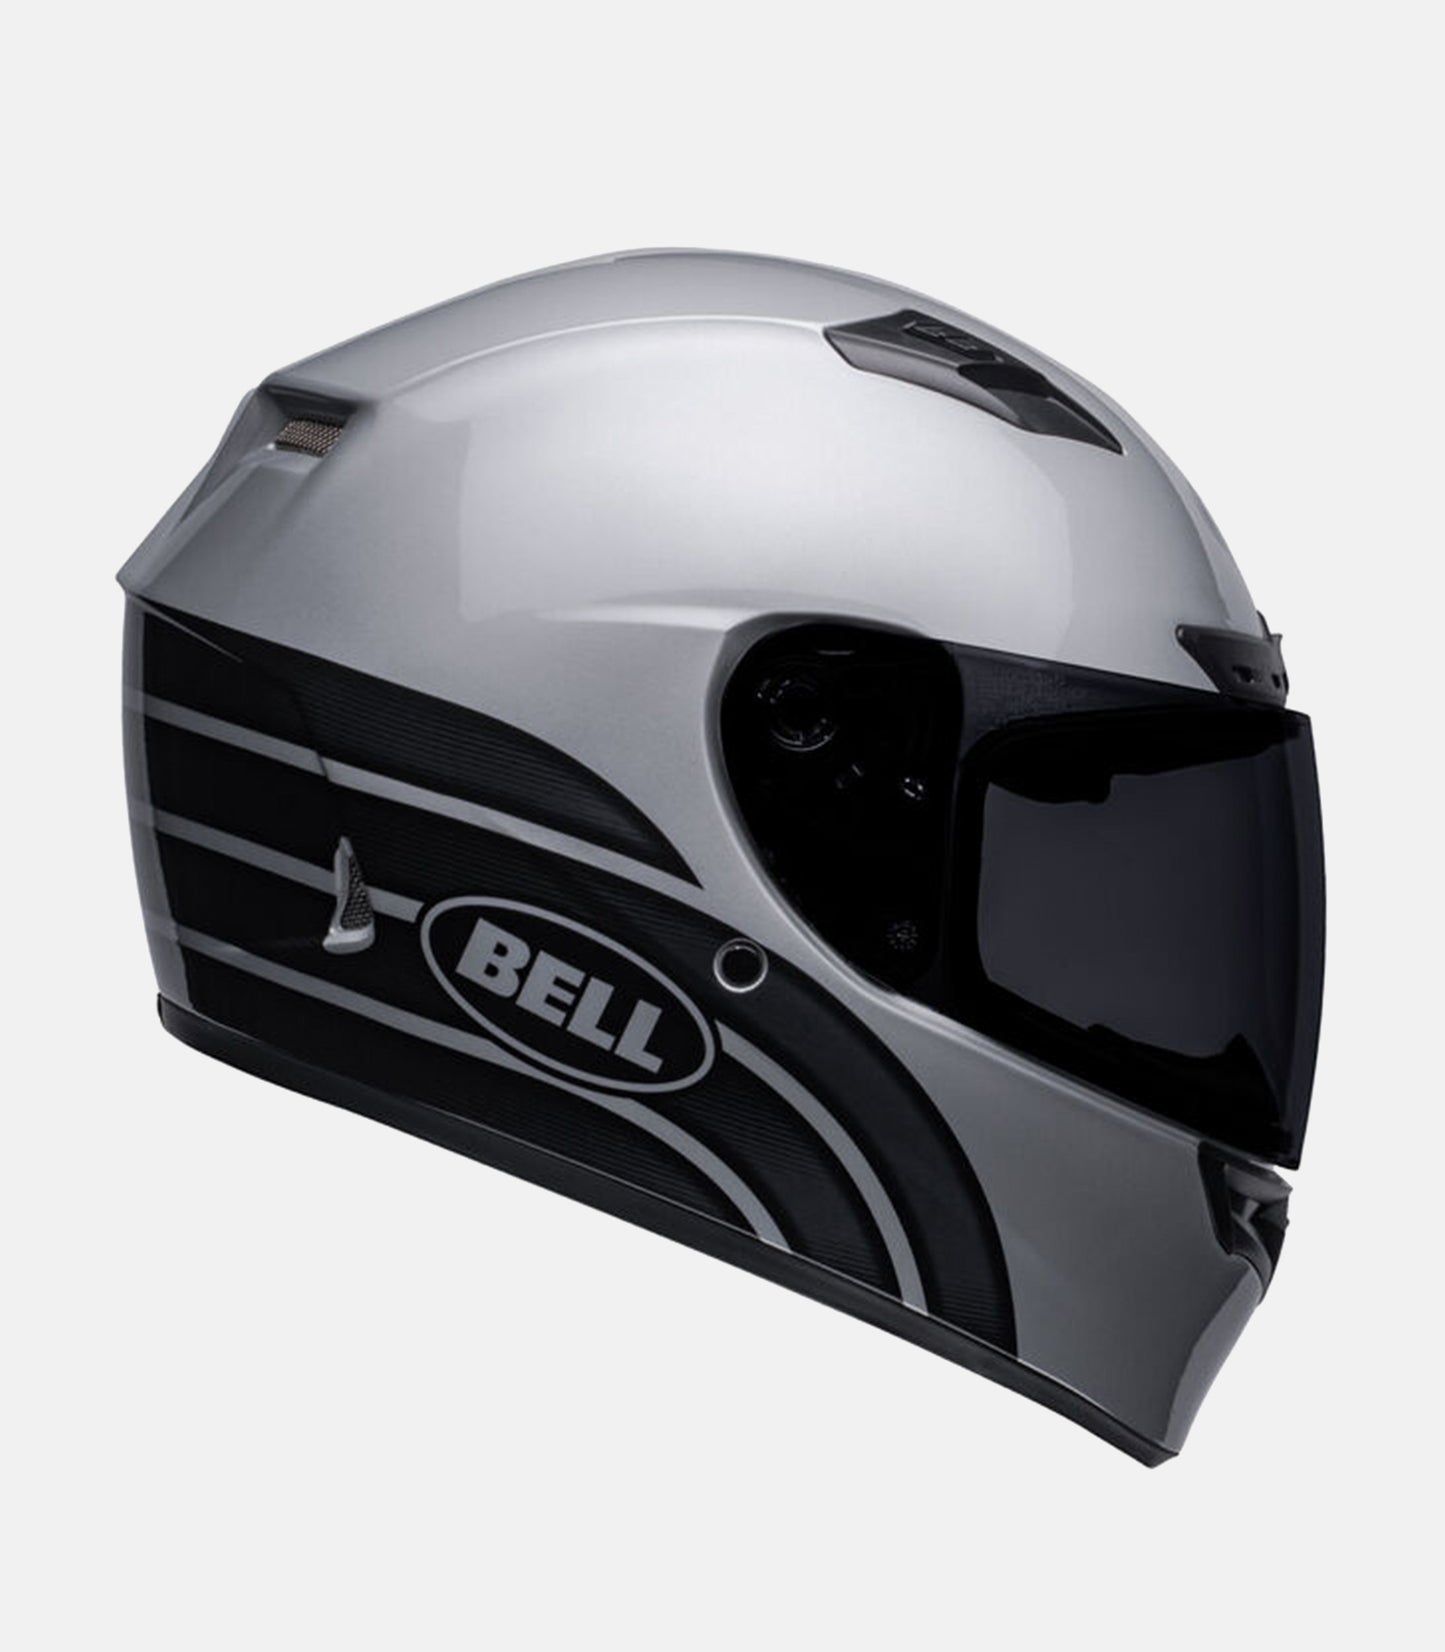 BELL Qualifier DLX MIPS Helmet - Ace-4 Gloss Gray/Charcoal